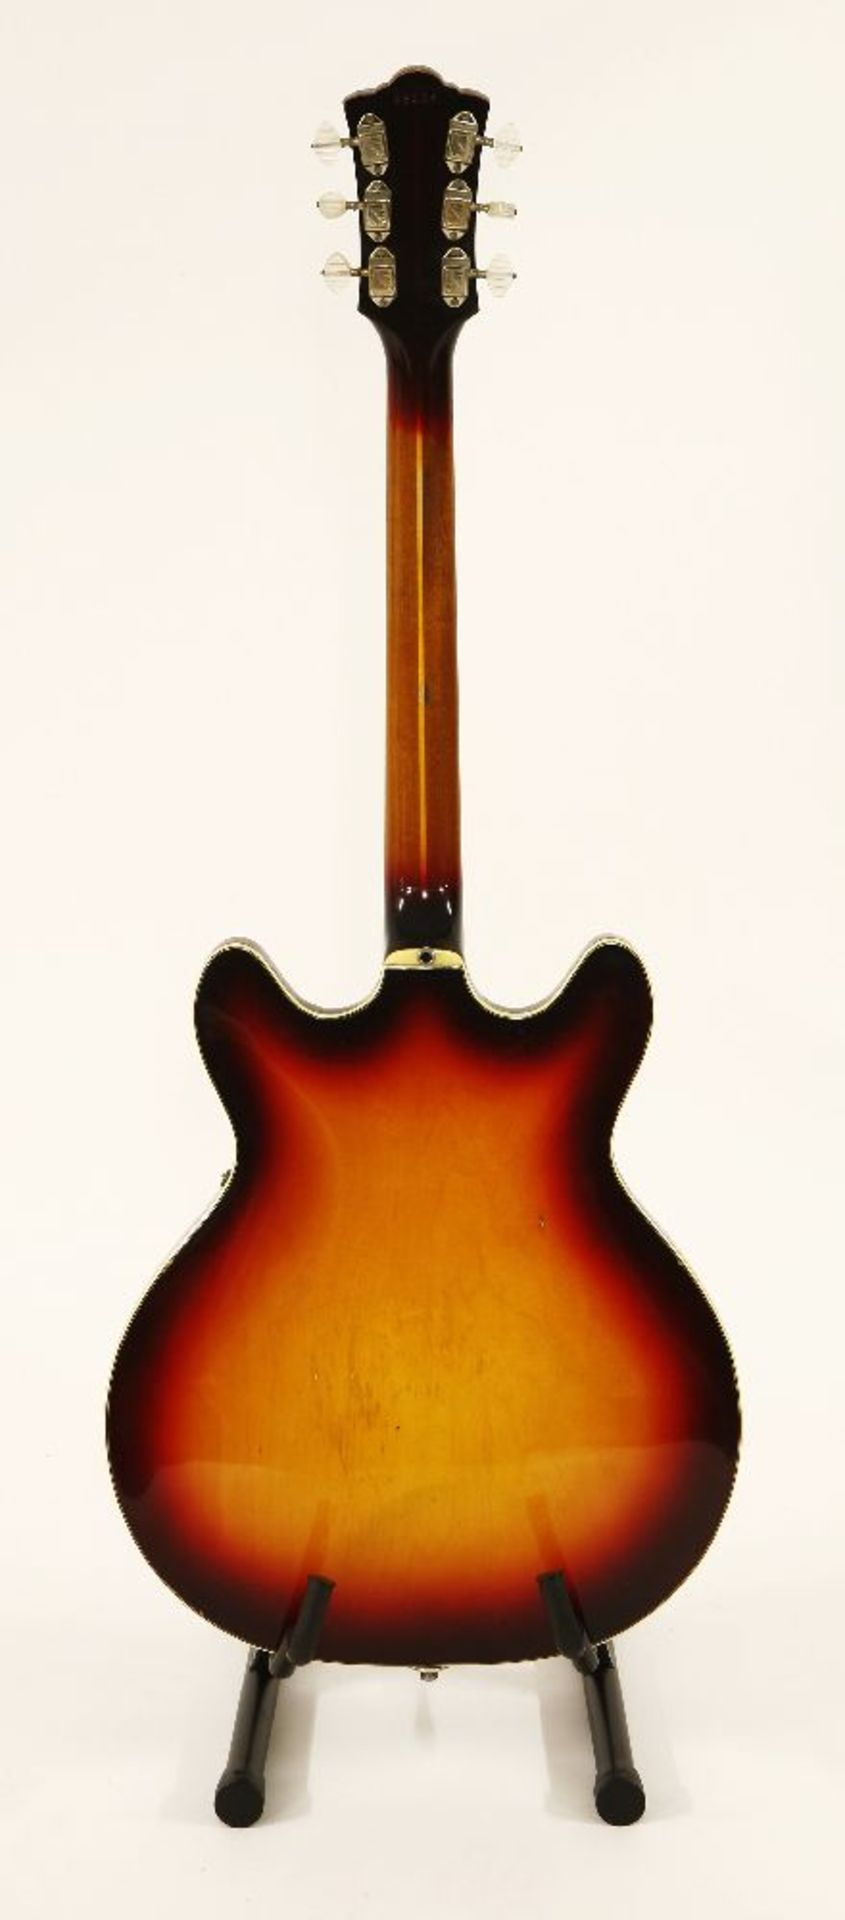 A 1965 Guild Starfire V semi-electric guitar, §serial number 4***5, in cherry sunburst finish and - Image 2 of 5